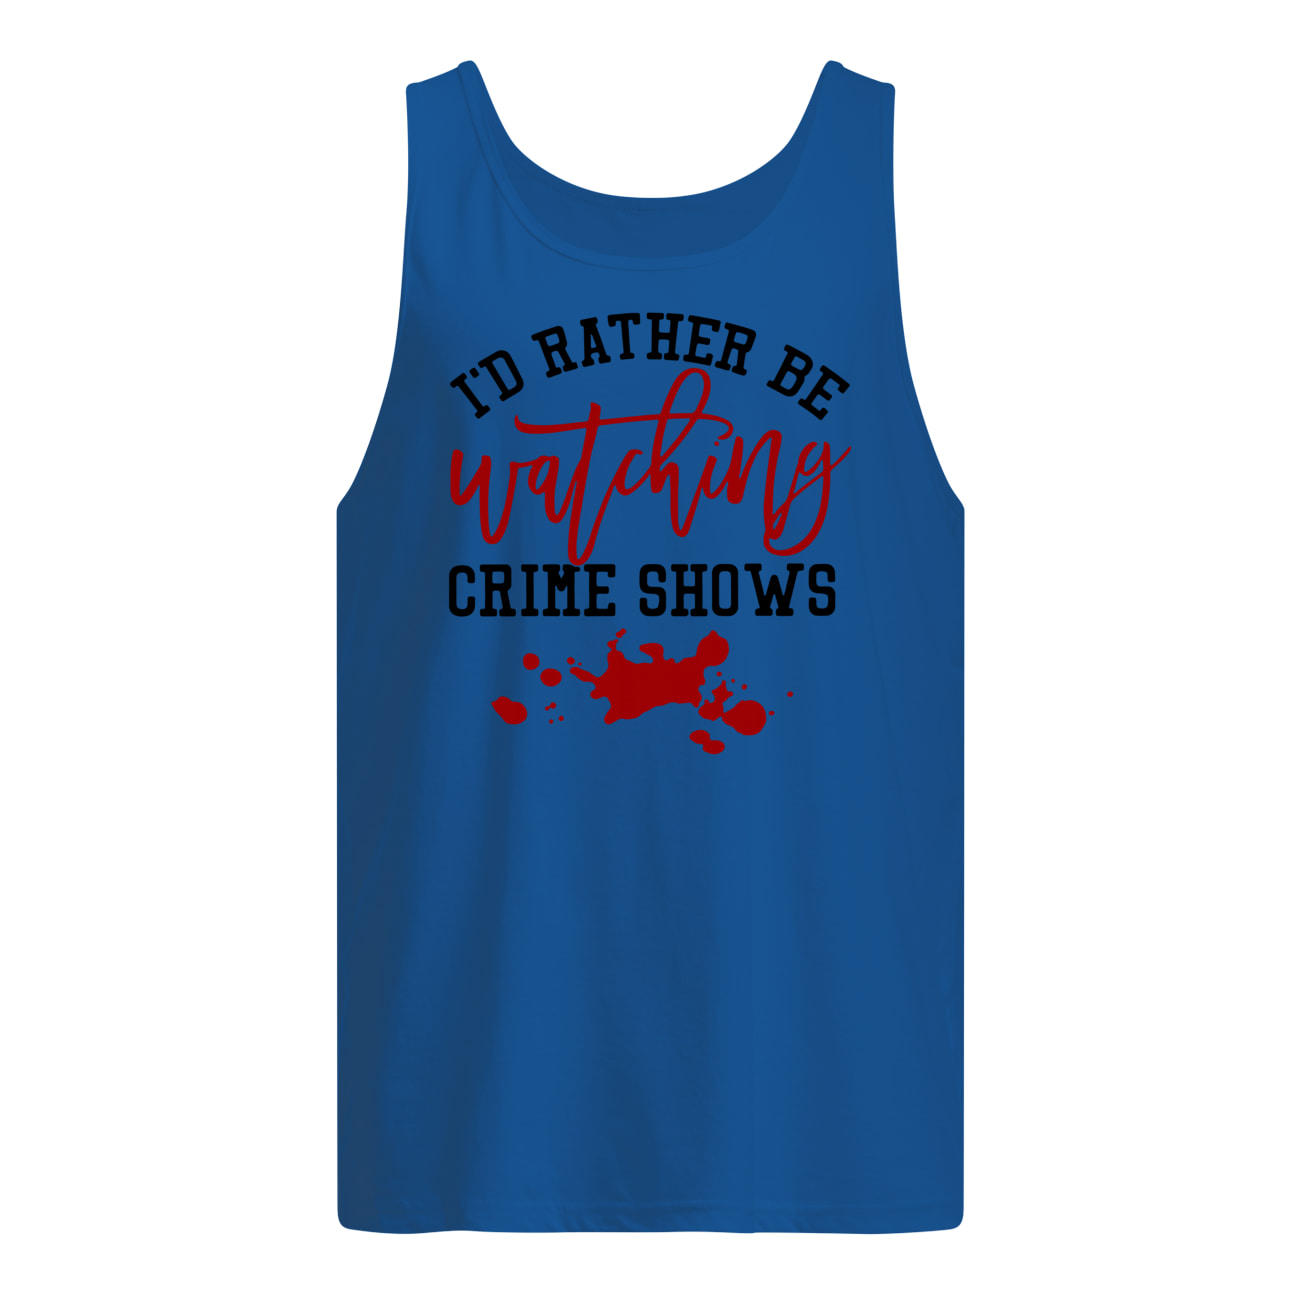 I'd rather be watching crime shows tank top